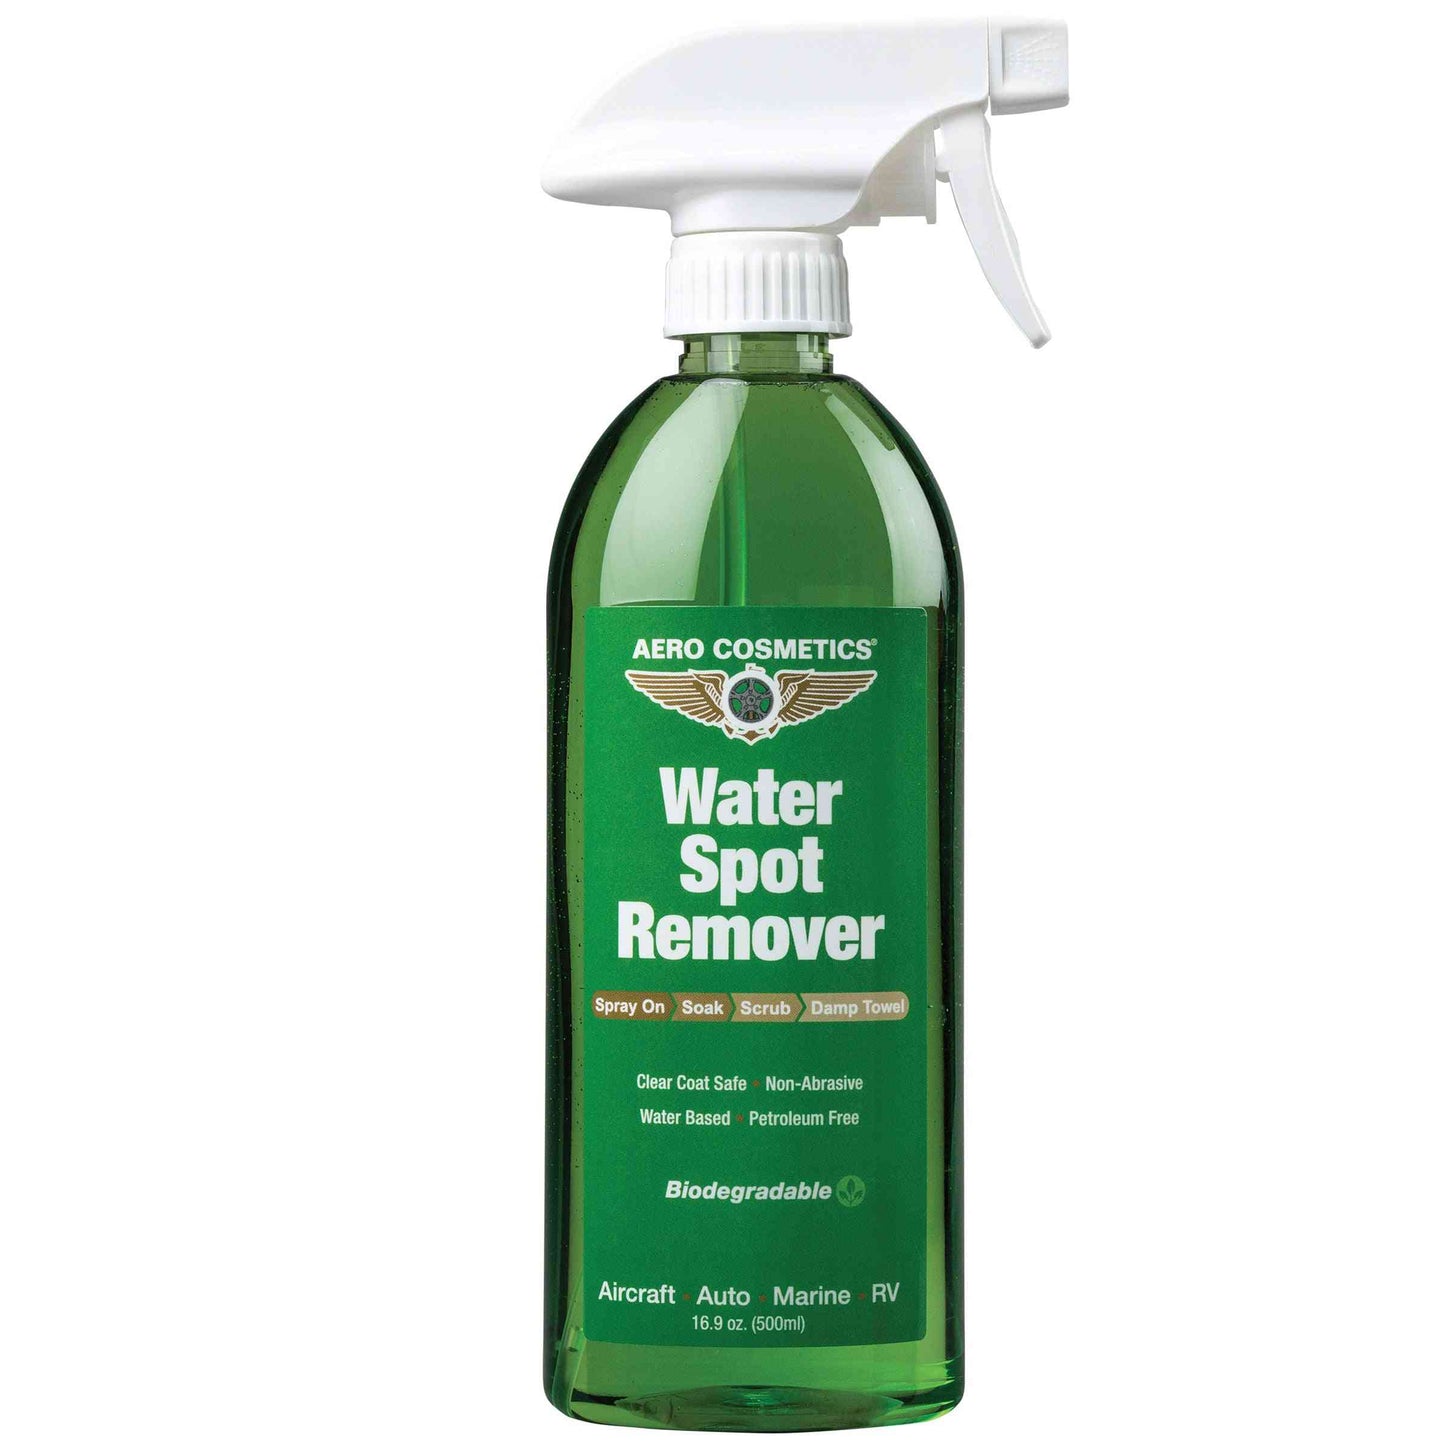 Water Spot Remover 16 Fl. oz - Removes Water Spots from Gel-Coat, Plastic, Chrome, Aluminum and Stainless